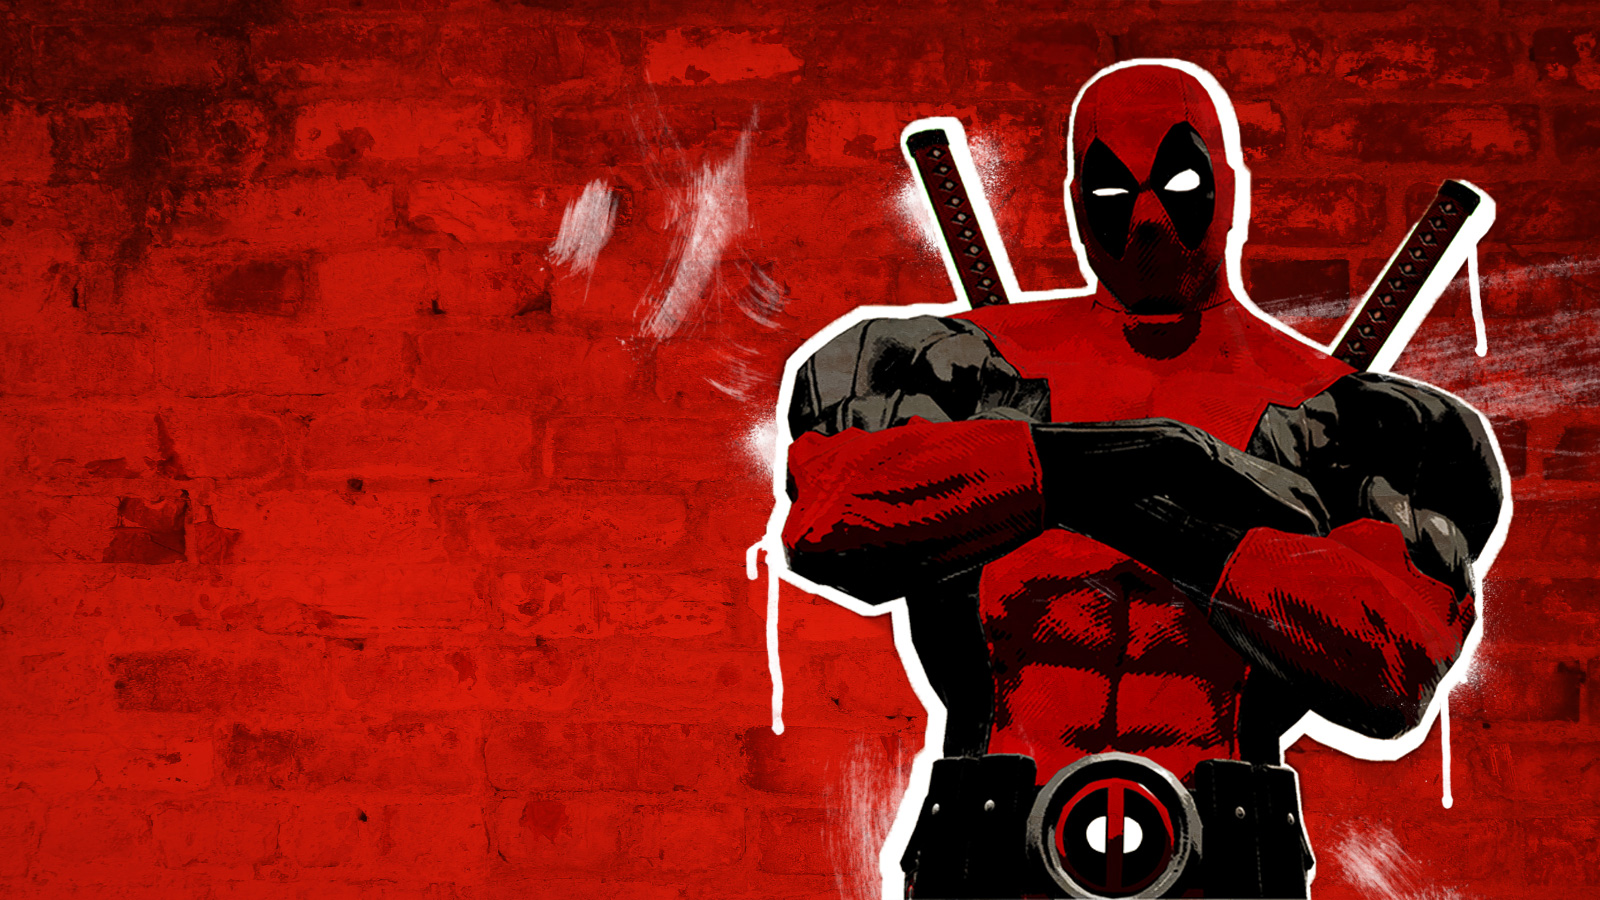 545 Deadpool HD Wallpapers Backgrounds Wallpaper Abyss Page 1600x900